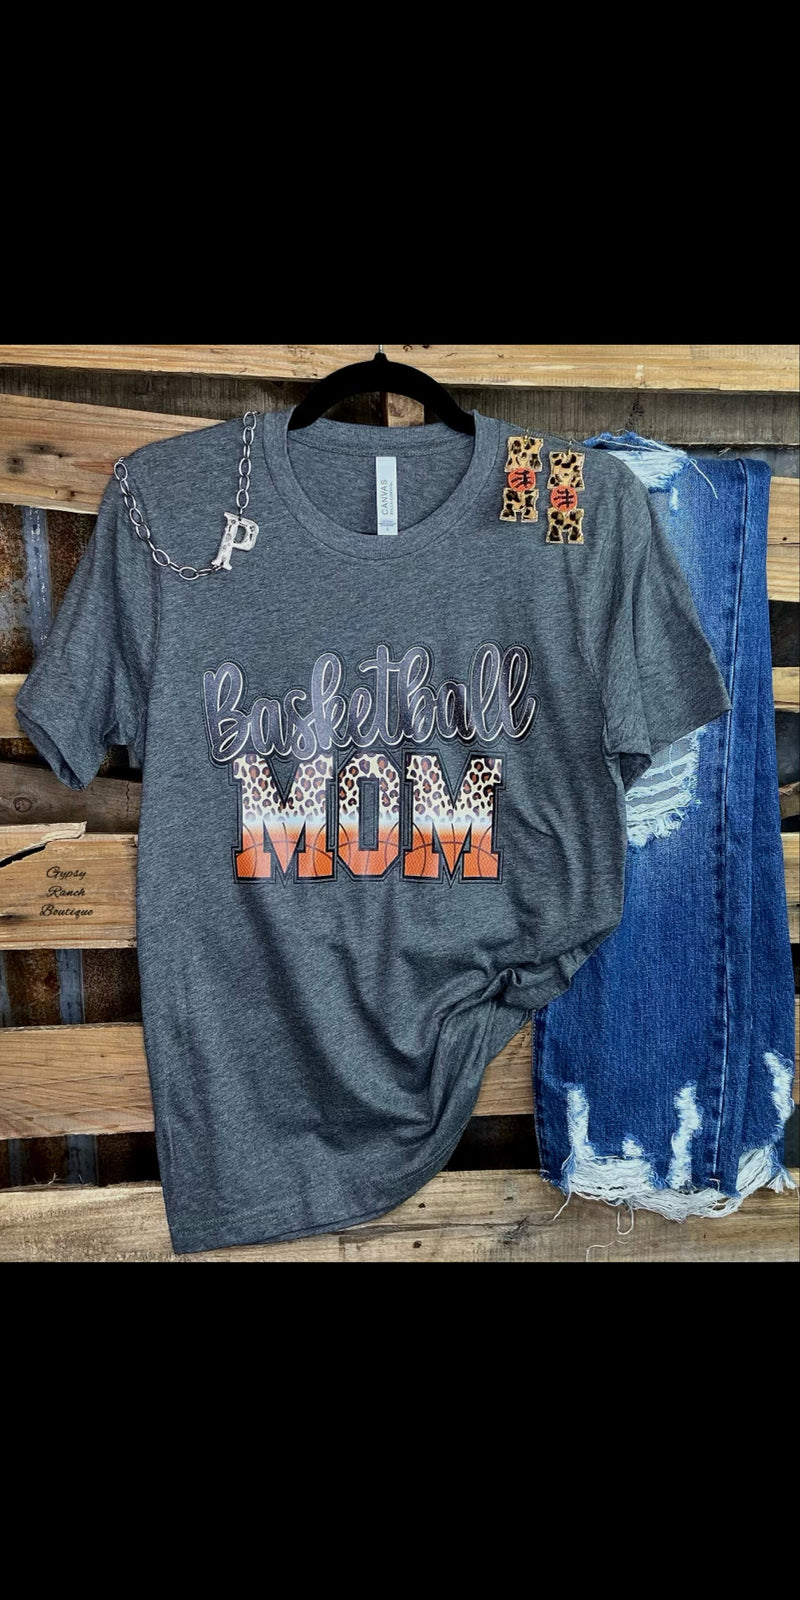 Basketball Mom Top - Also in Plus Size